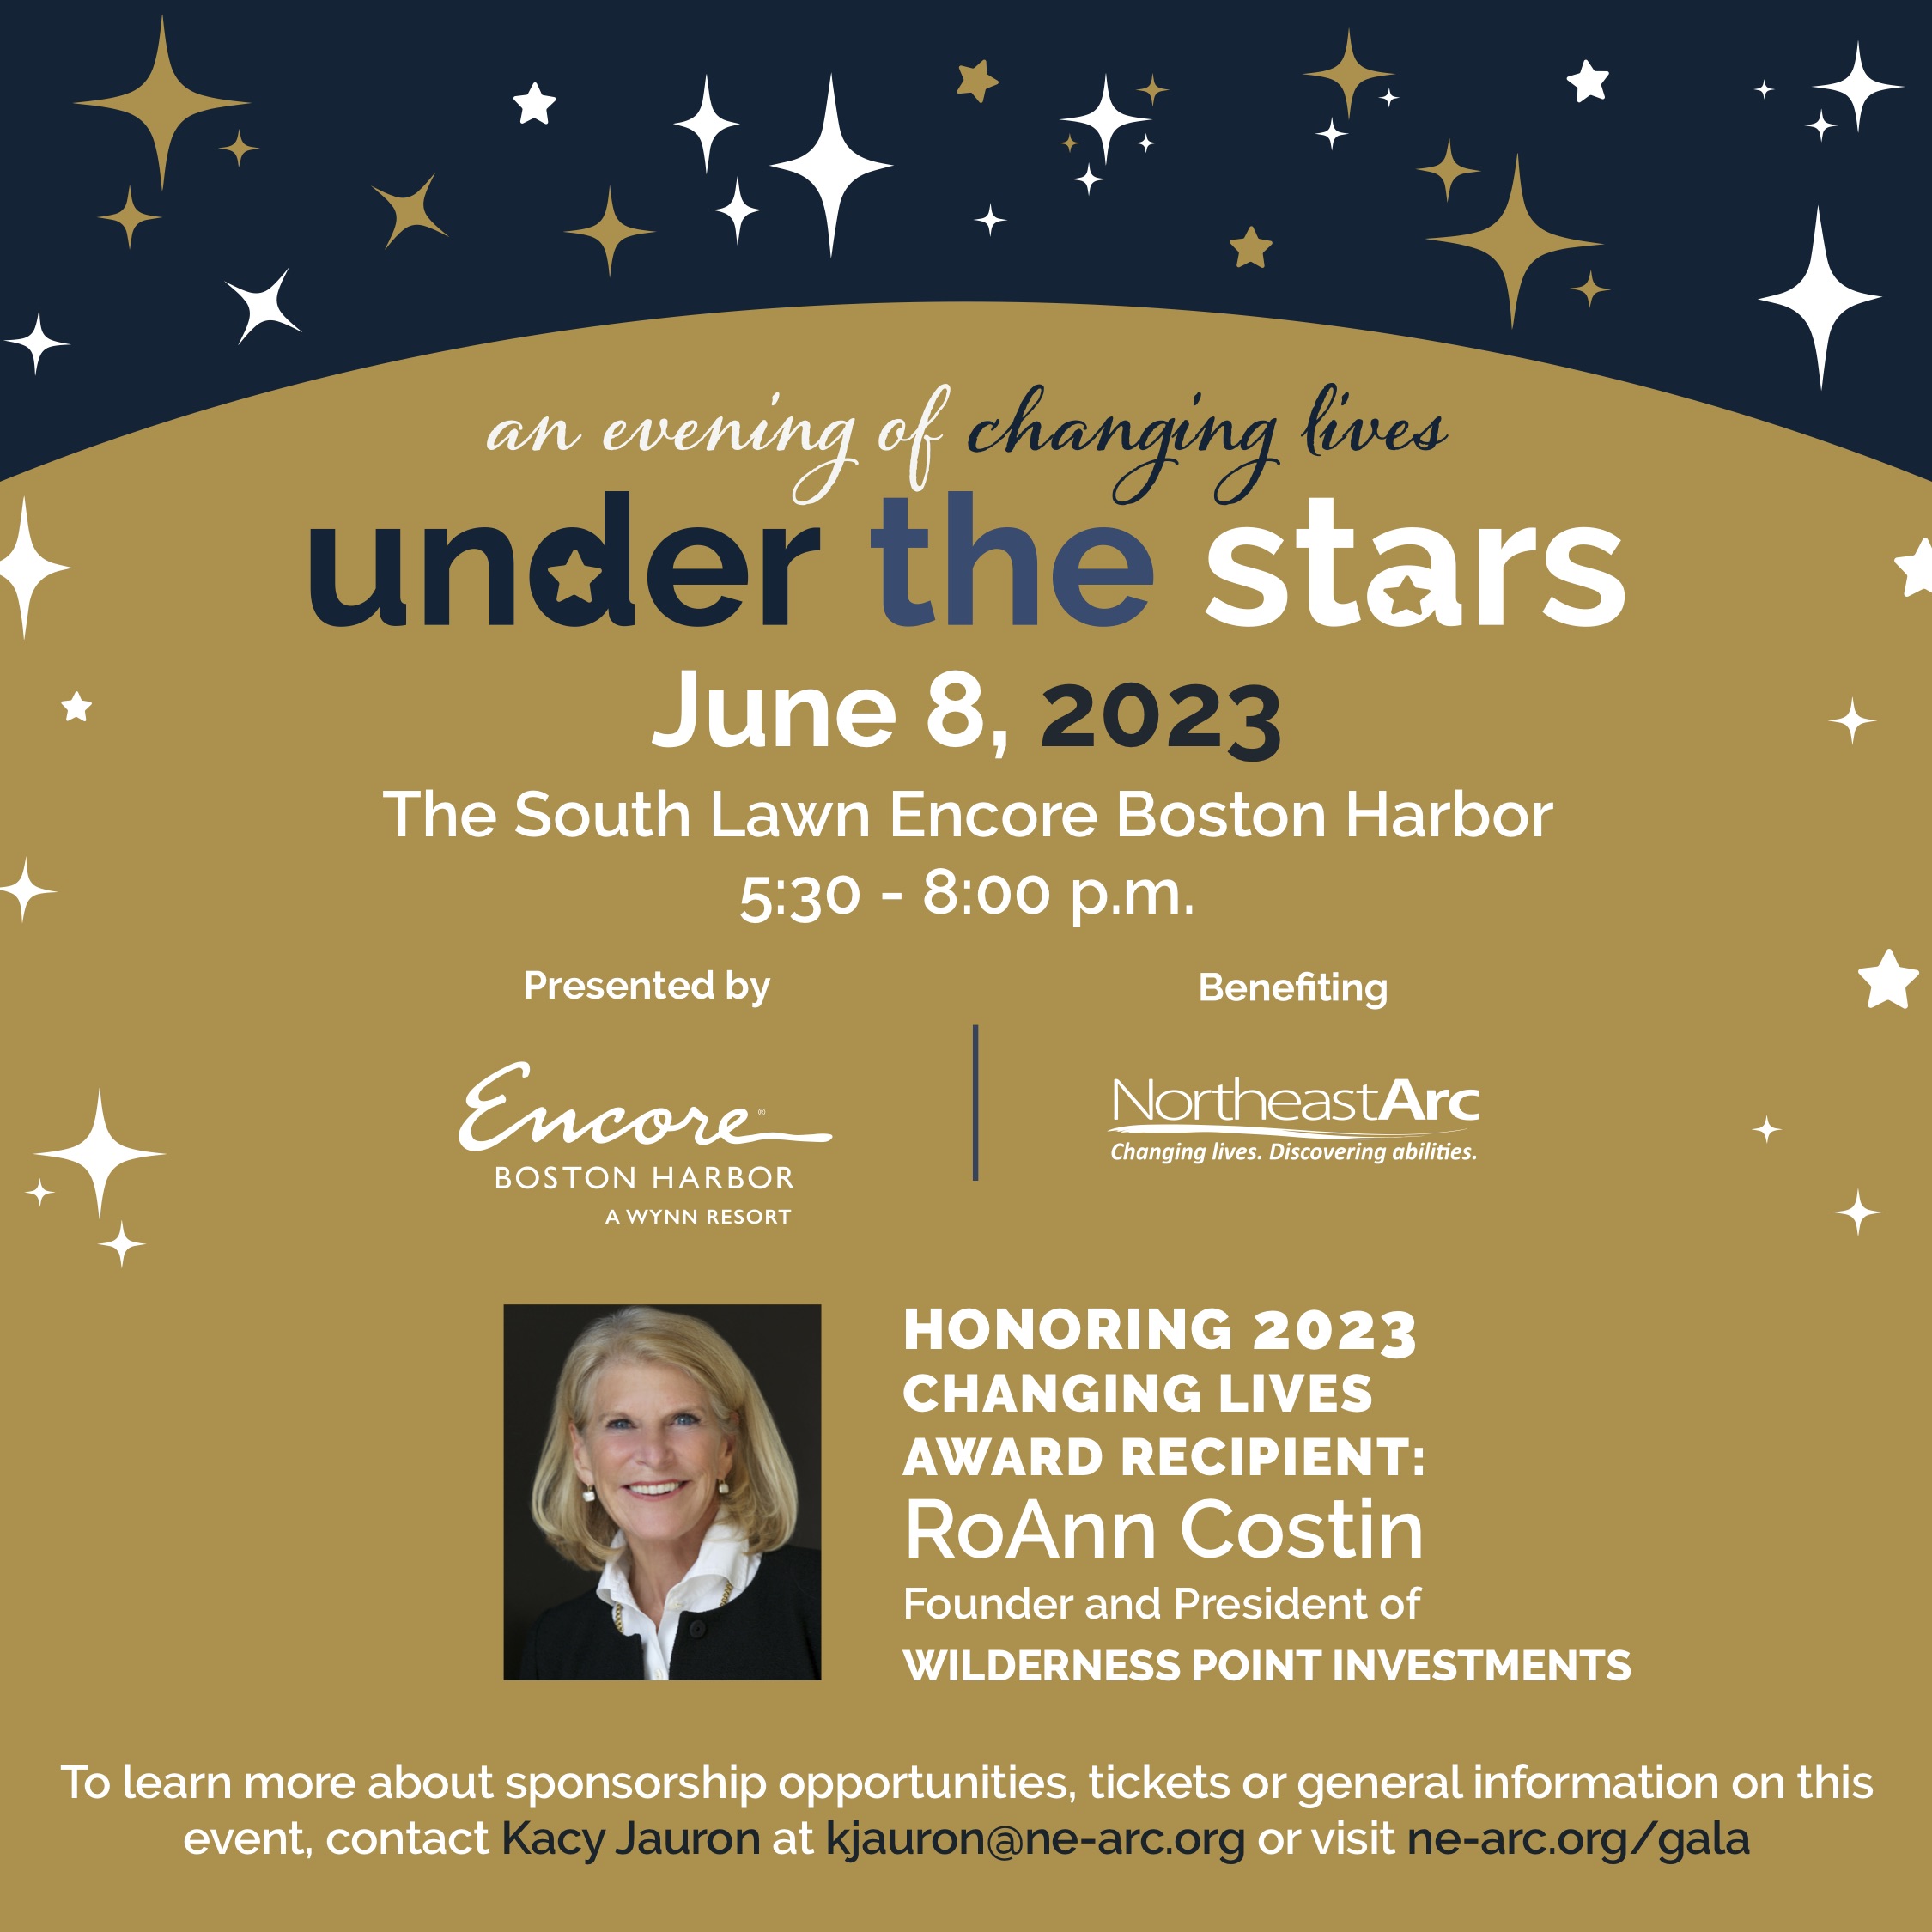 An Evening of Changing Lives honoring RoAnn Costin, June 8, 2023